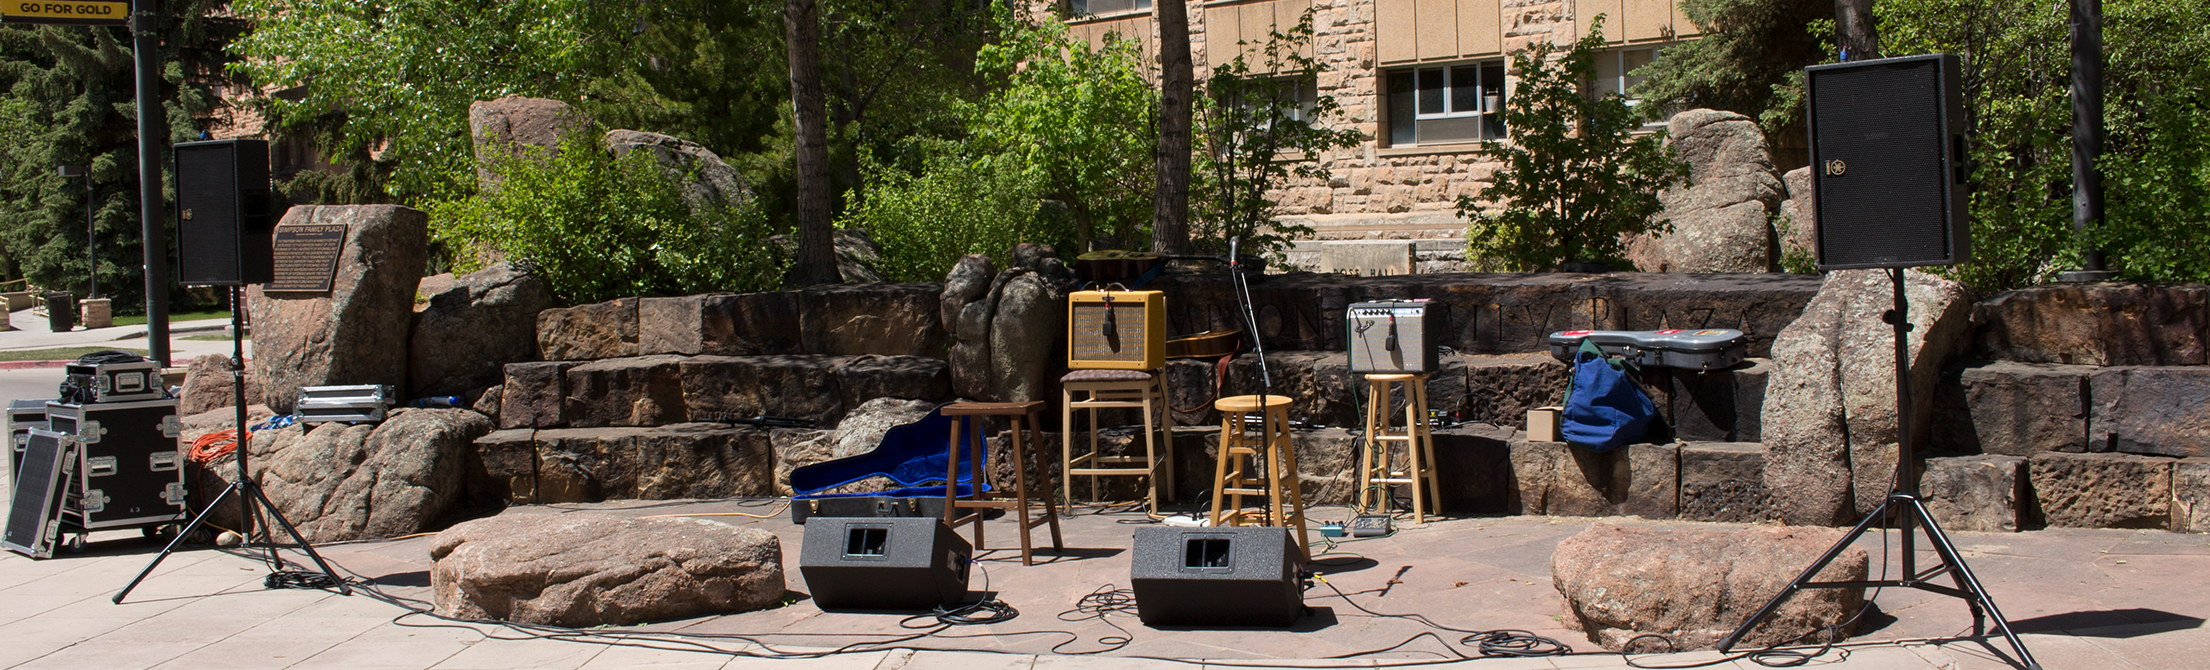 Speakers and monitors set up in front of miked amps and microphones at Simpsons Plaza